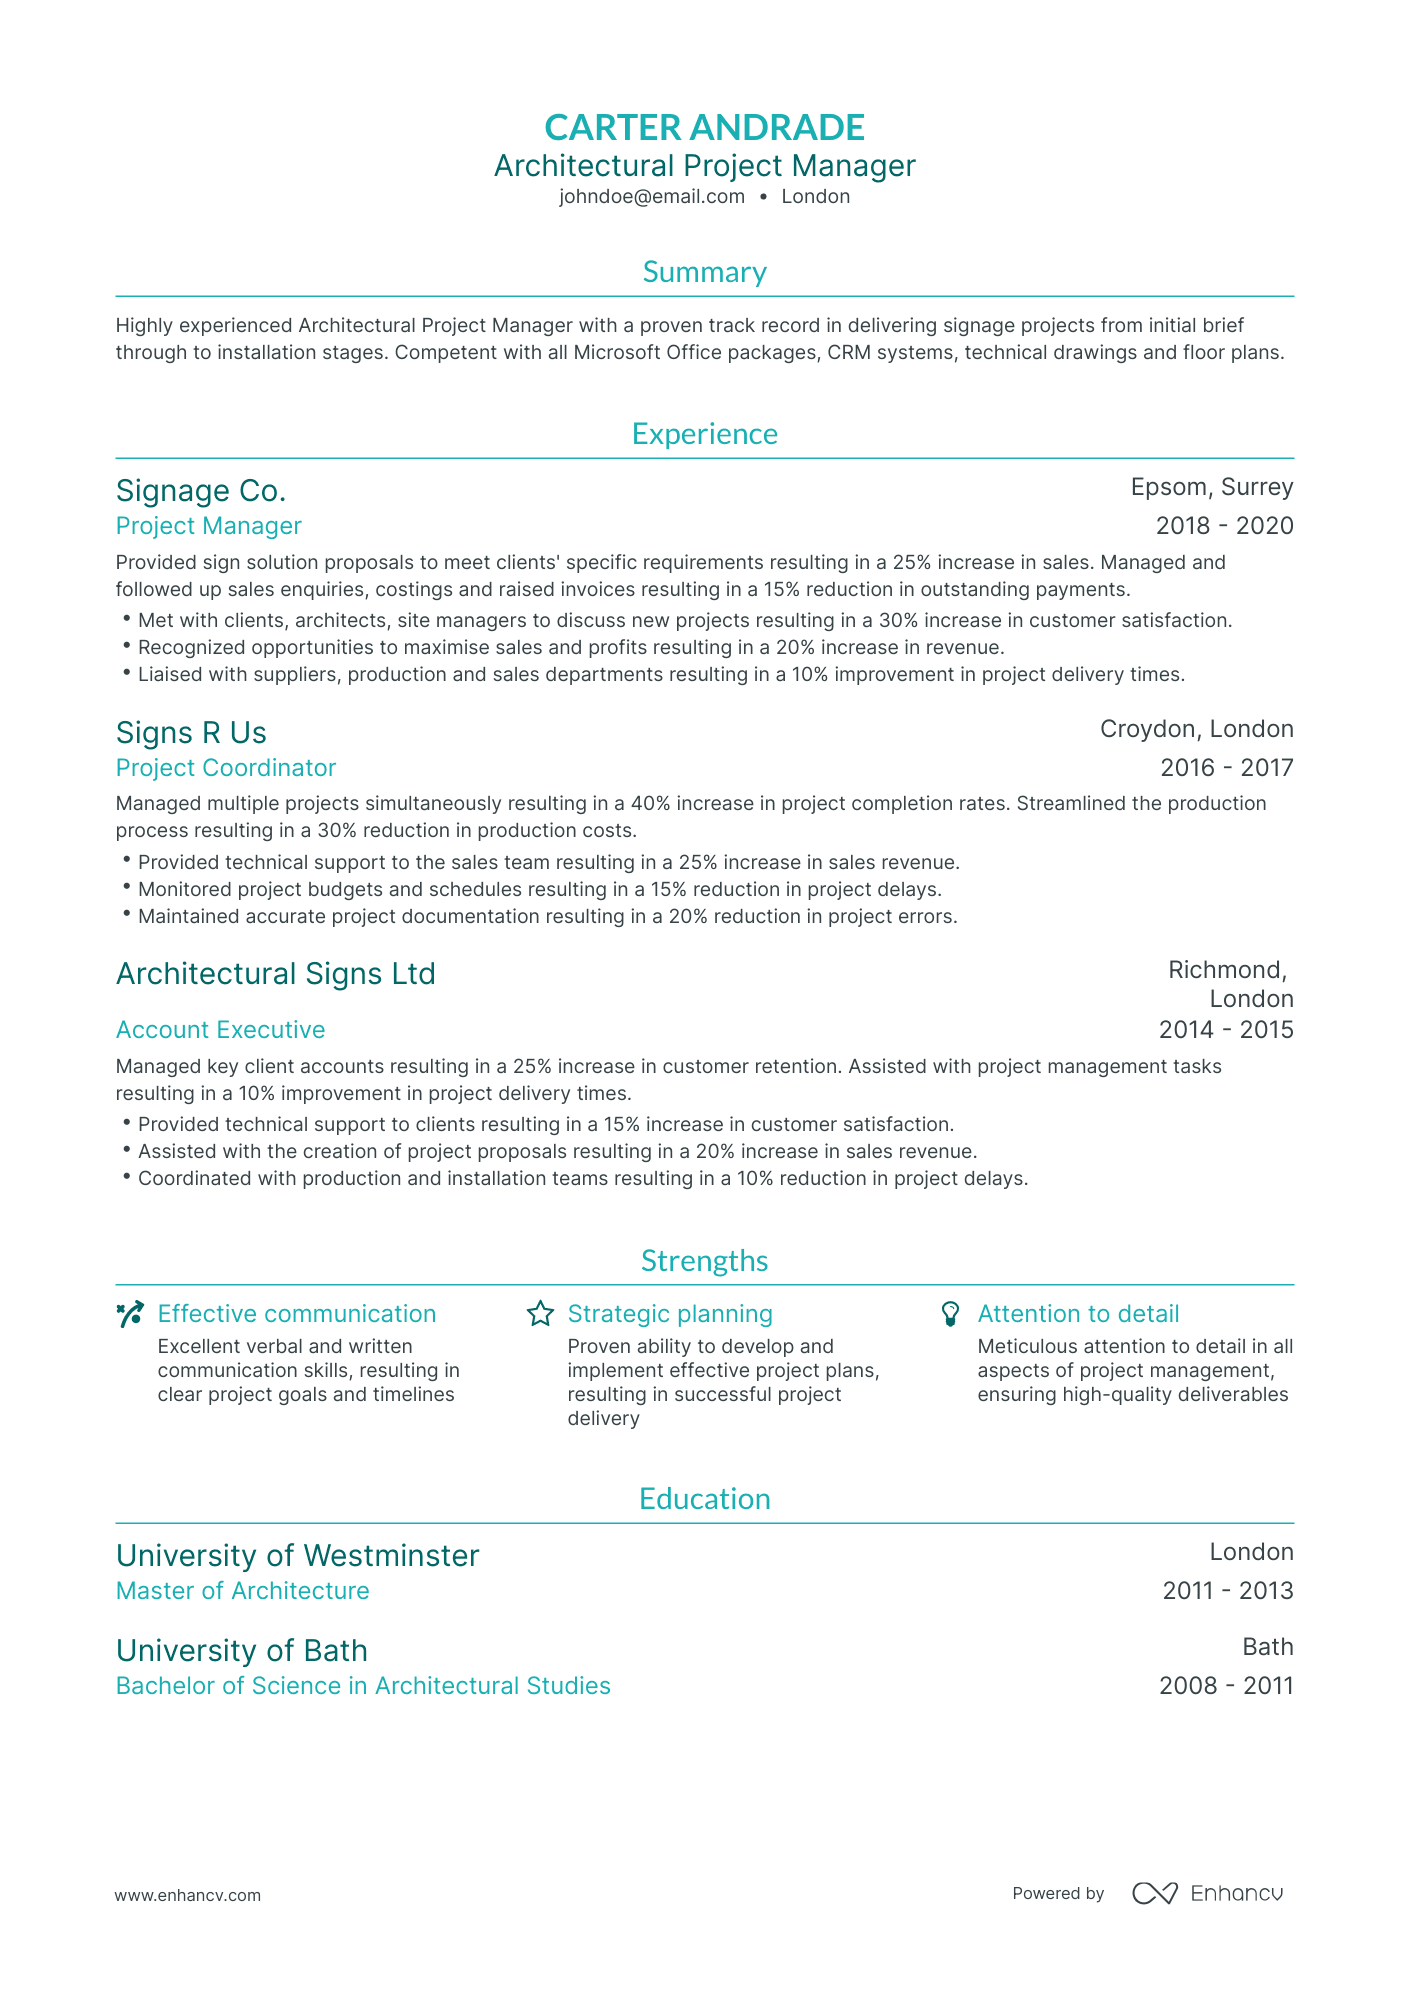 Traditional Architectural Project Manager Resume Template